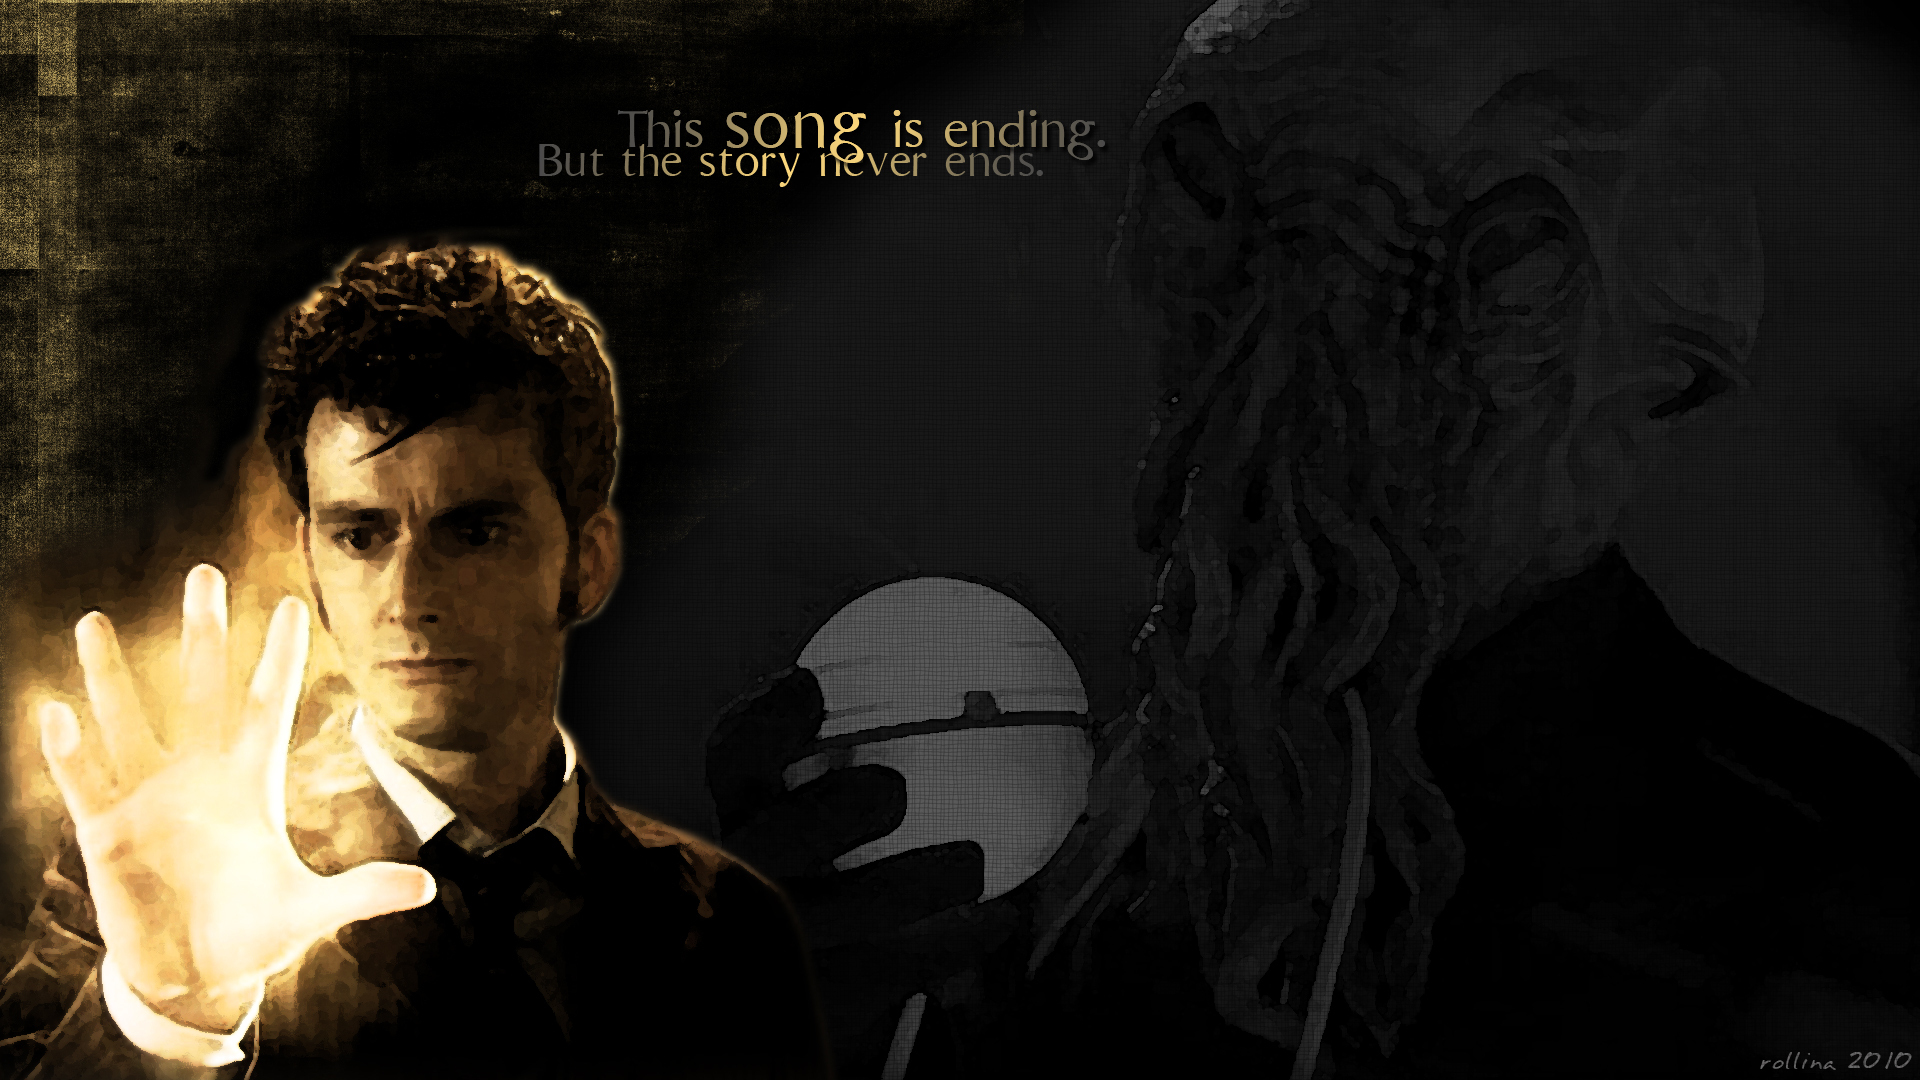 The Doctor Who Wallpaper